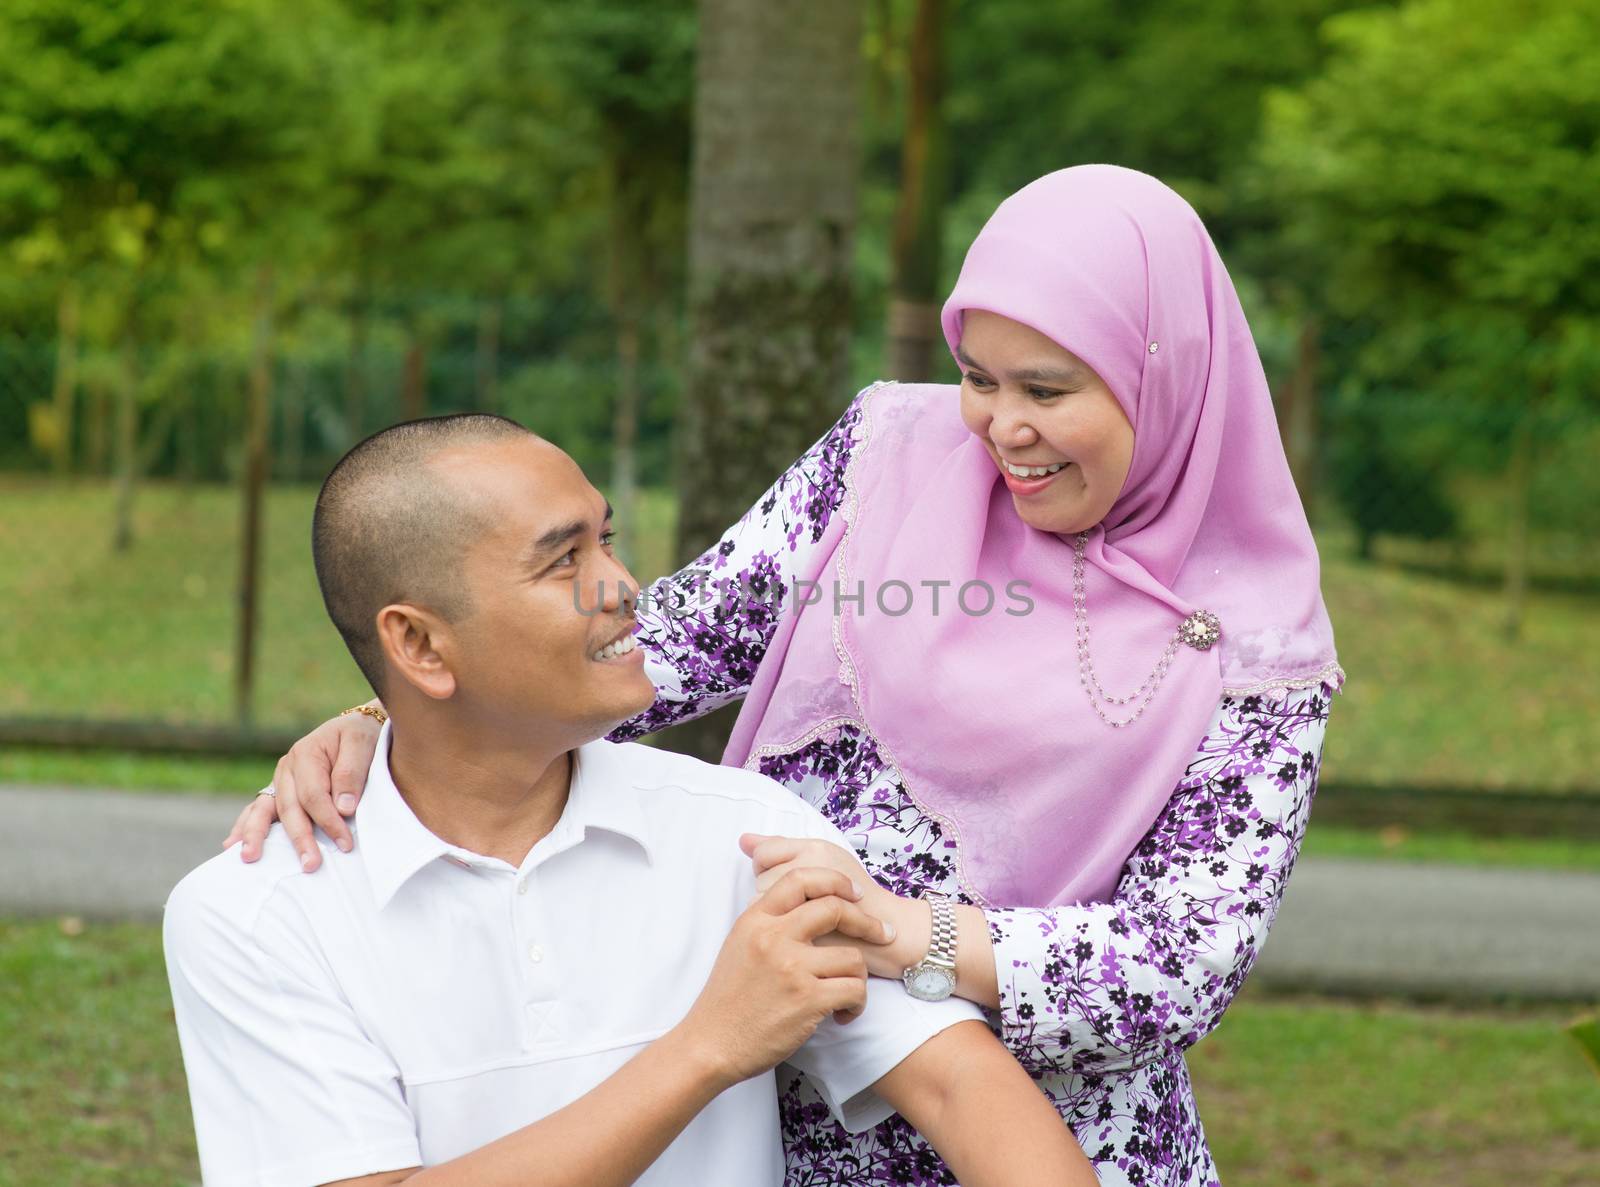 Southeast Asian Muslim couple at outdoor park, happy family lifestyle.